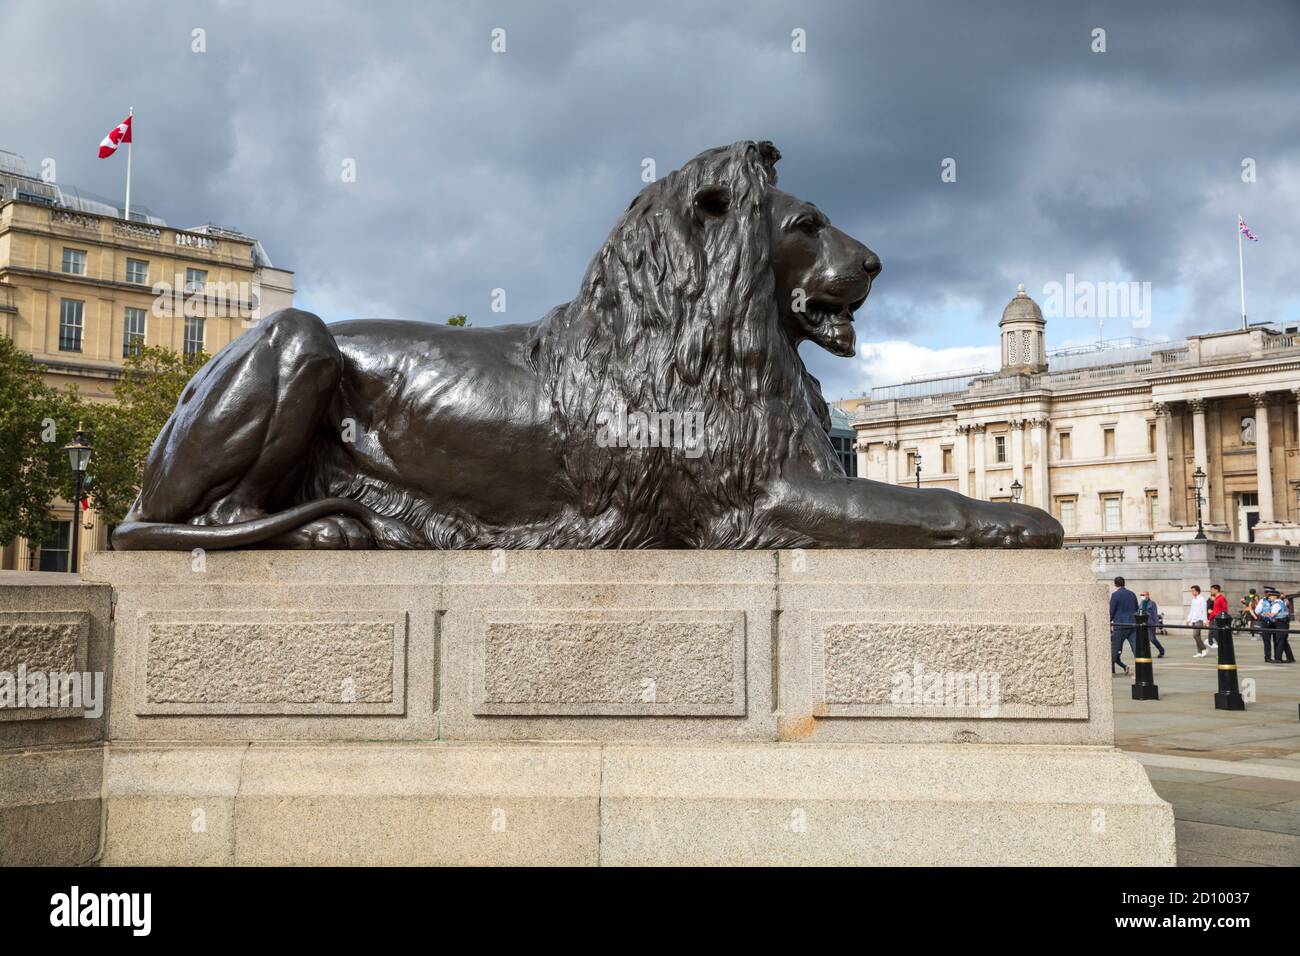 One of four monumental bronze lions guarding each corner of Trafalgar Square in London, England. Stock Photo